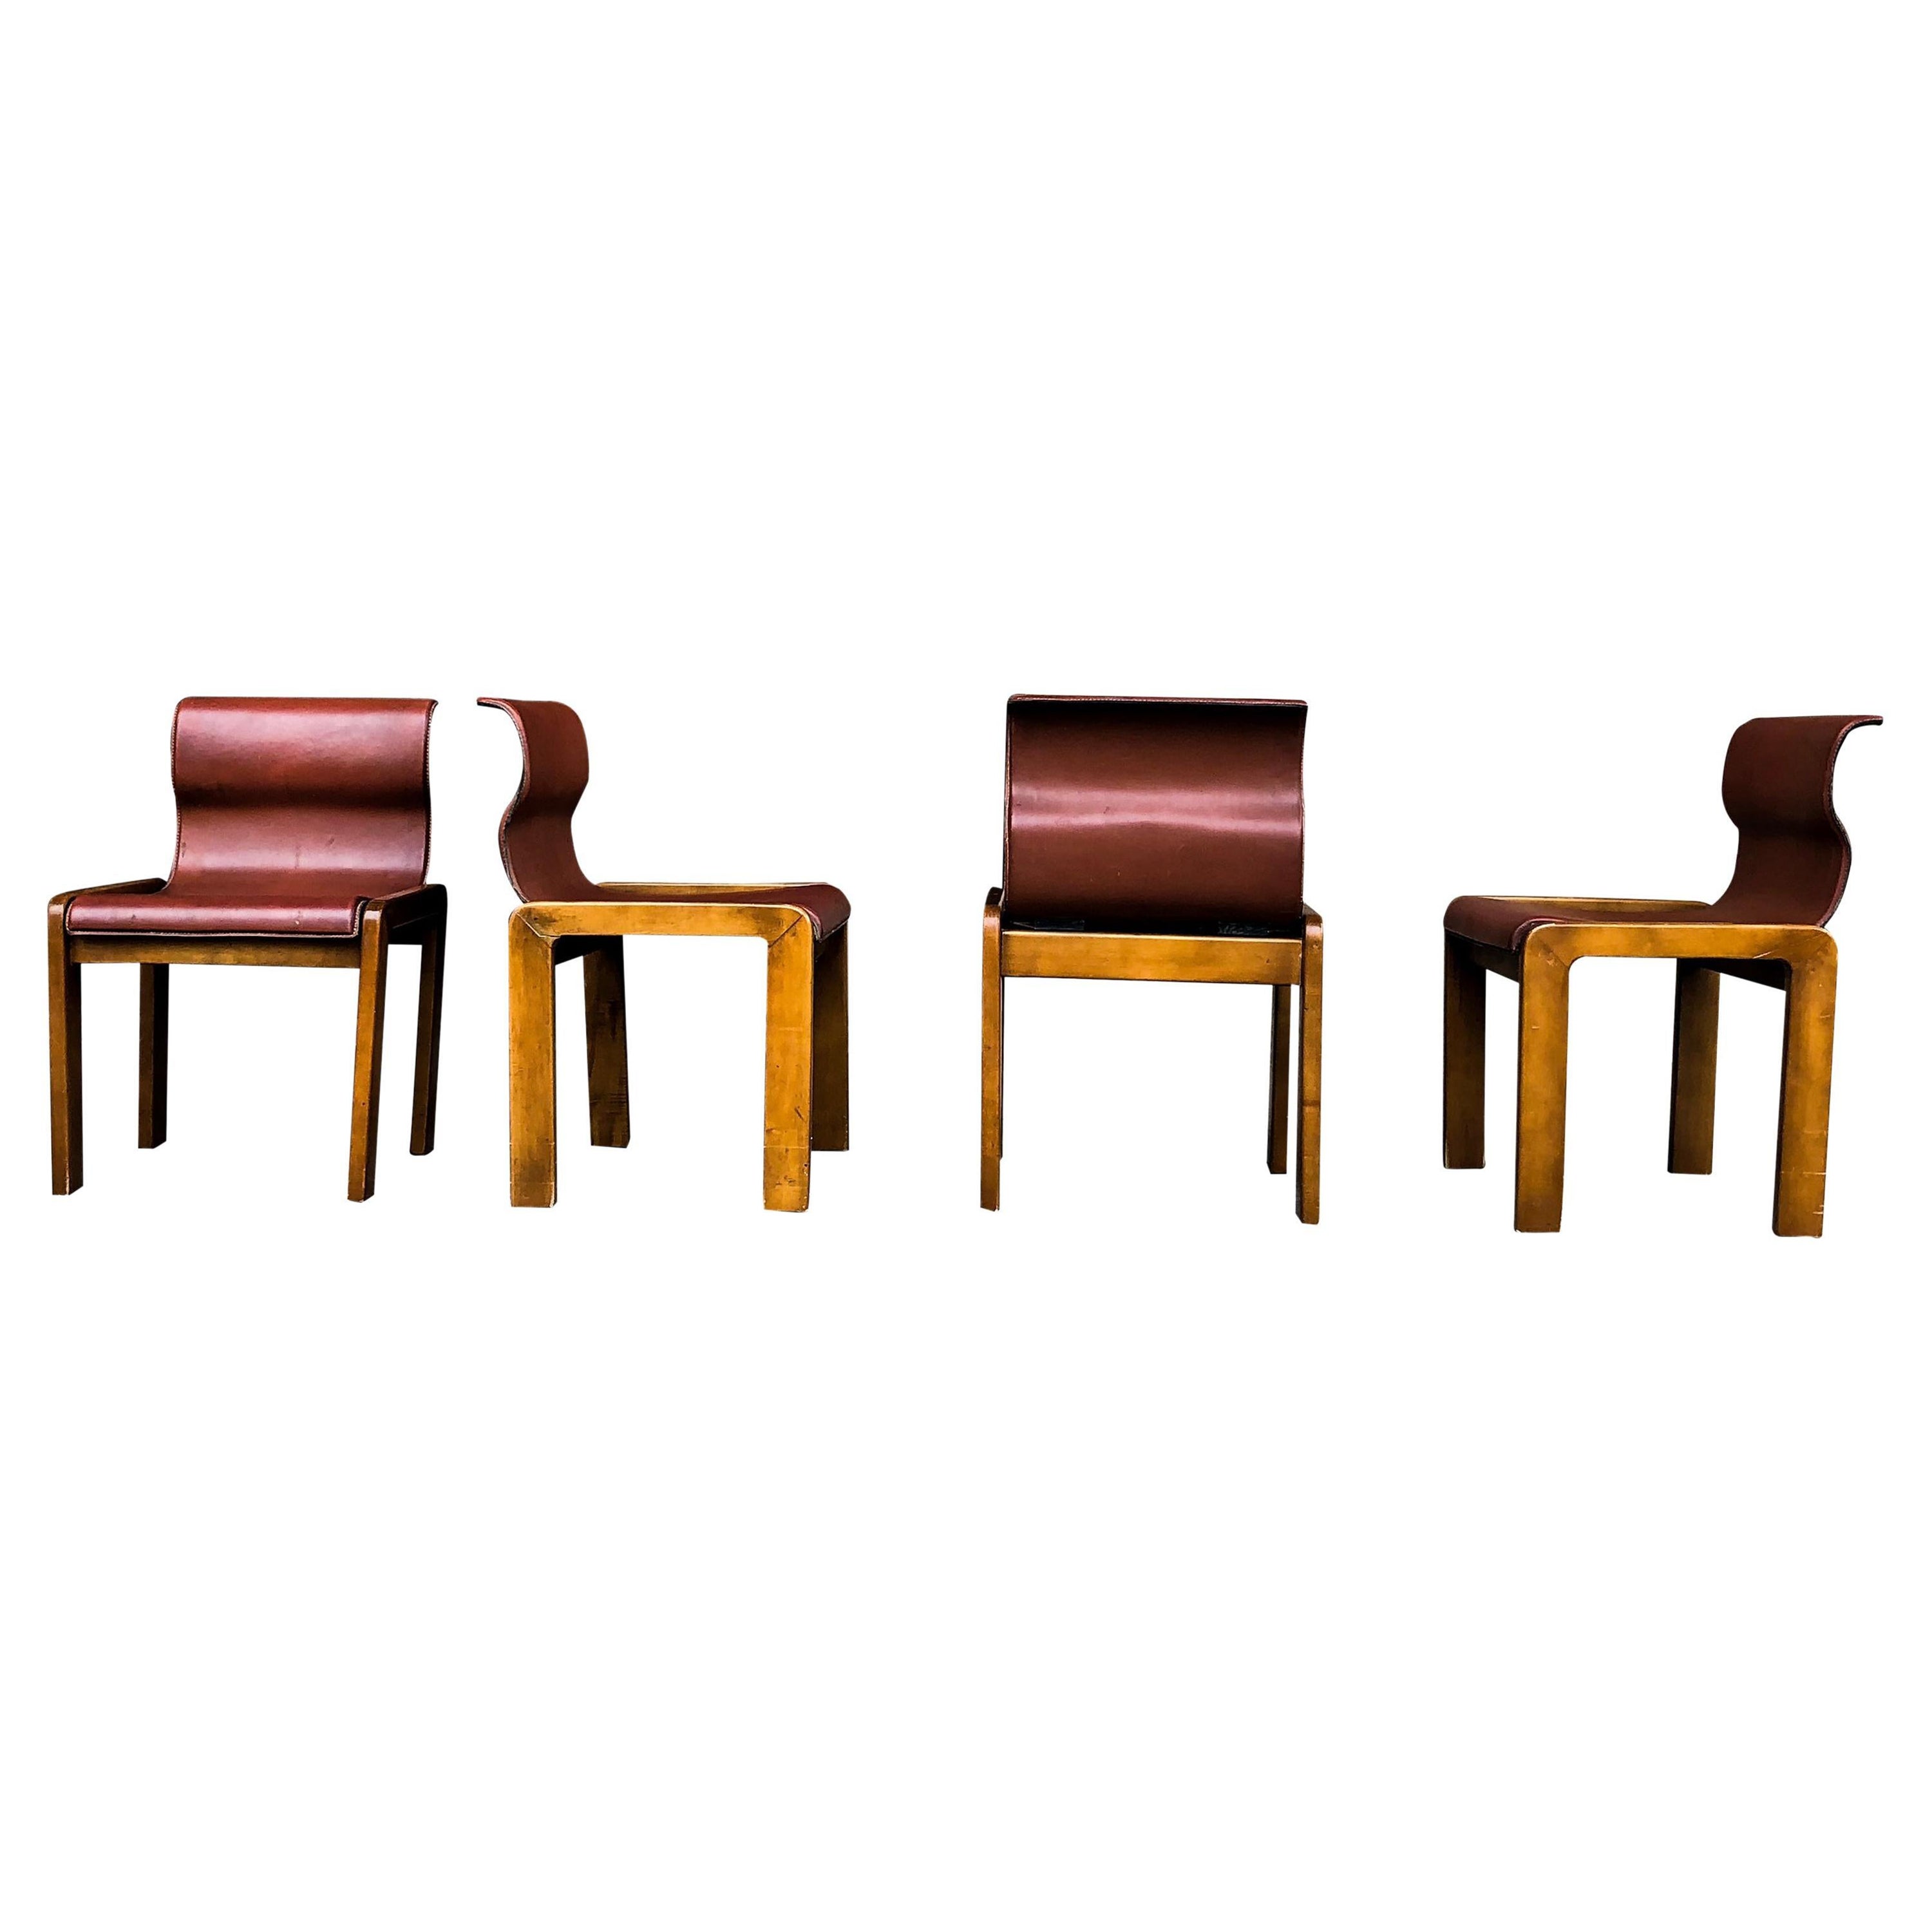 Afra & Tobia Scarpa Midcentury Leather and Plywood Dining Chair, 1966, Set of 4